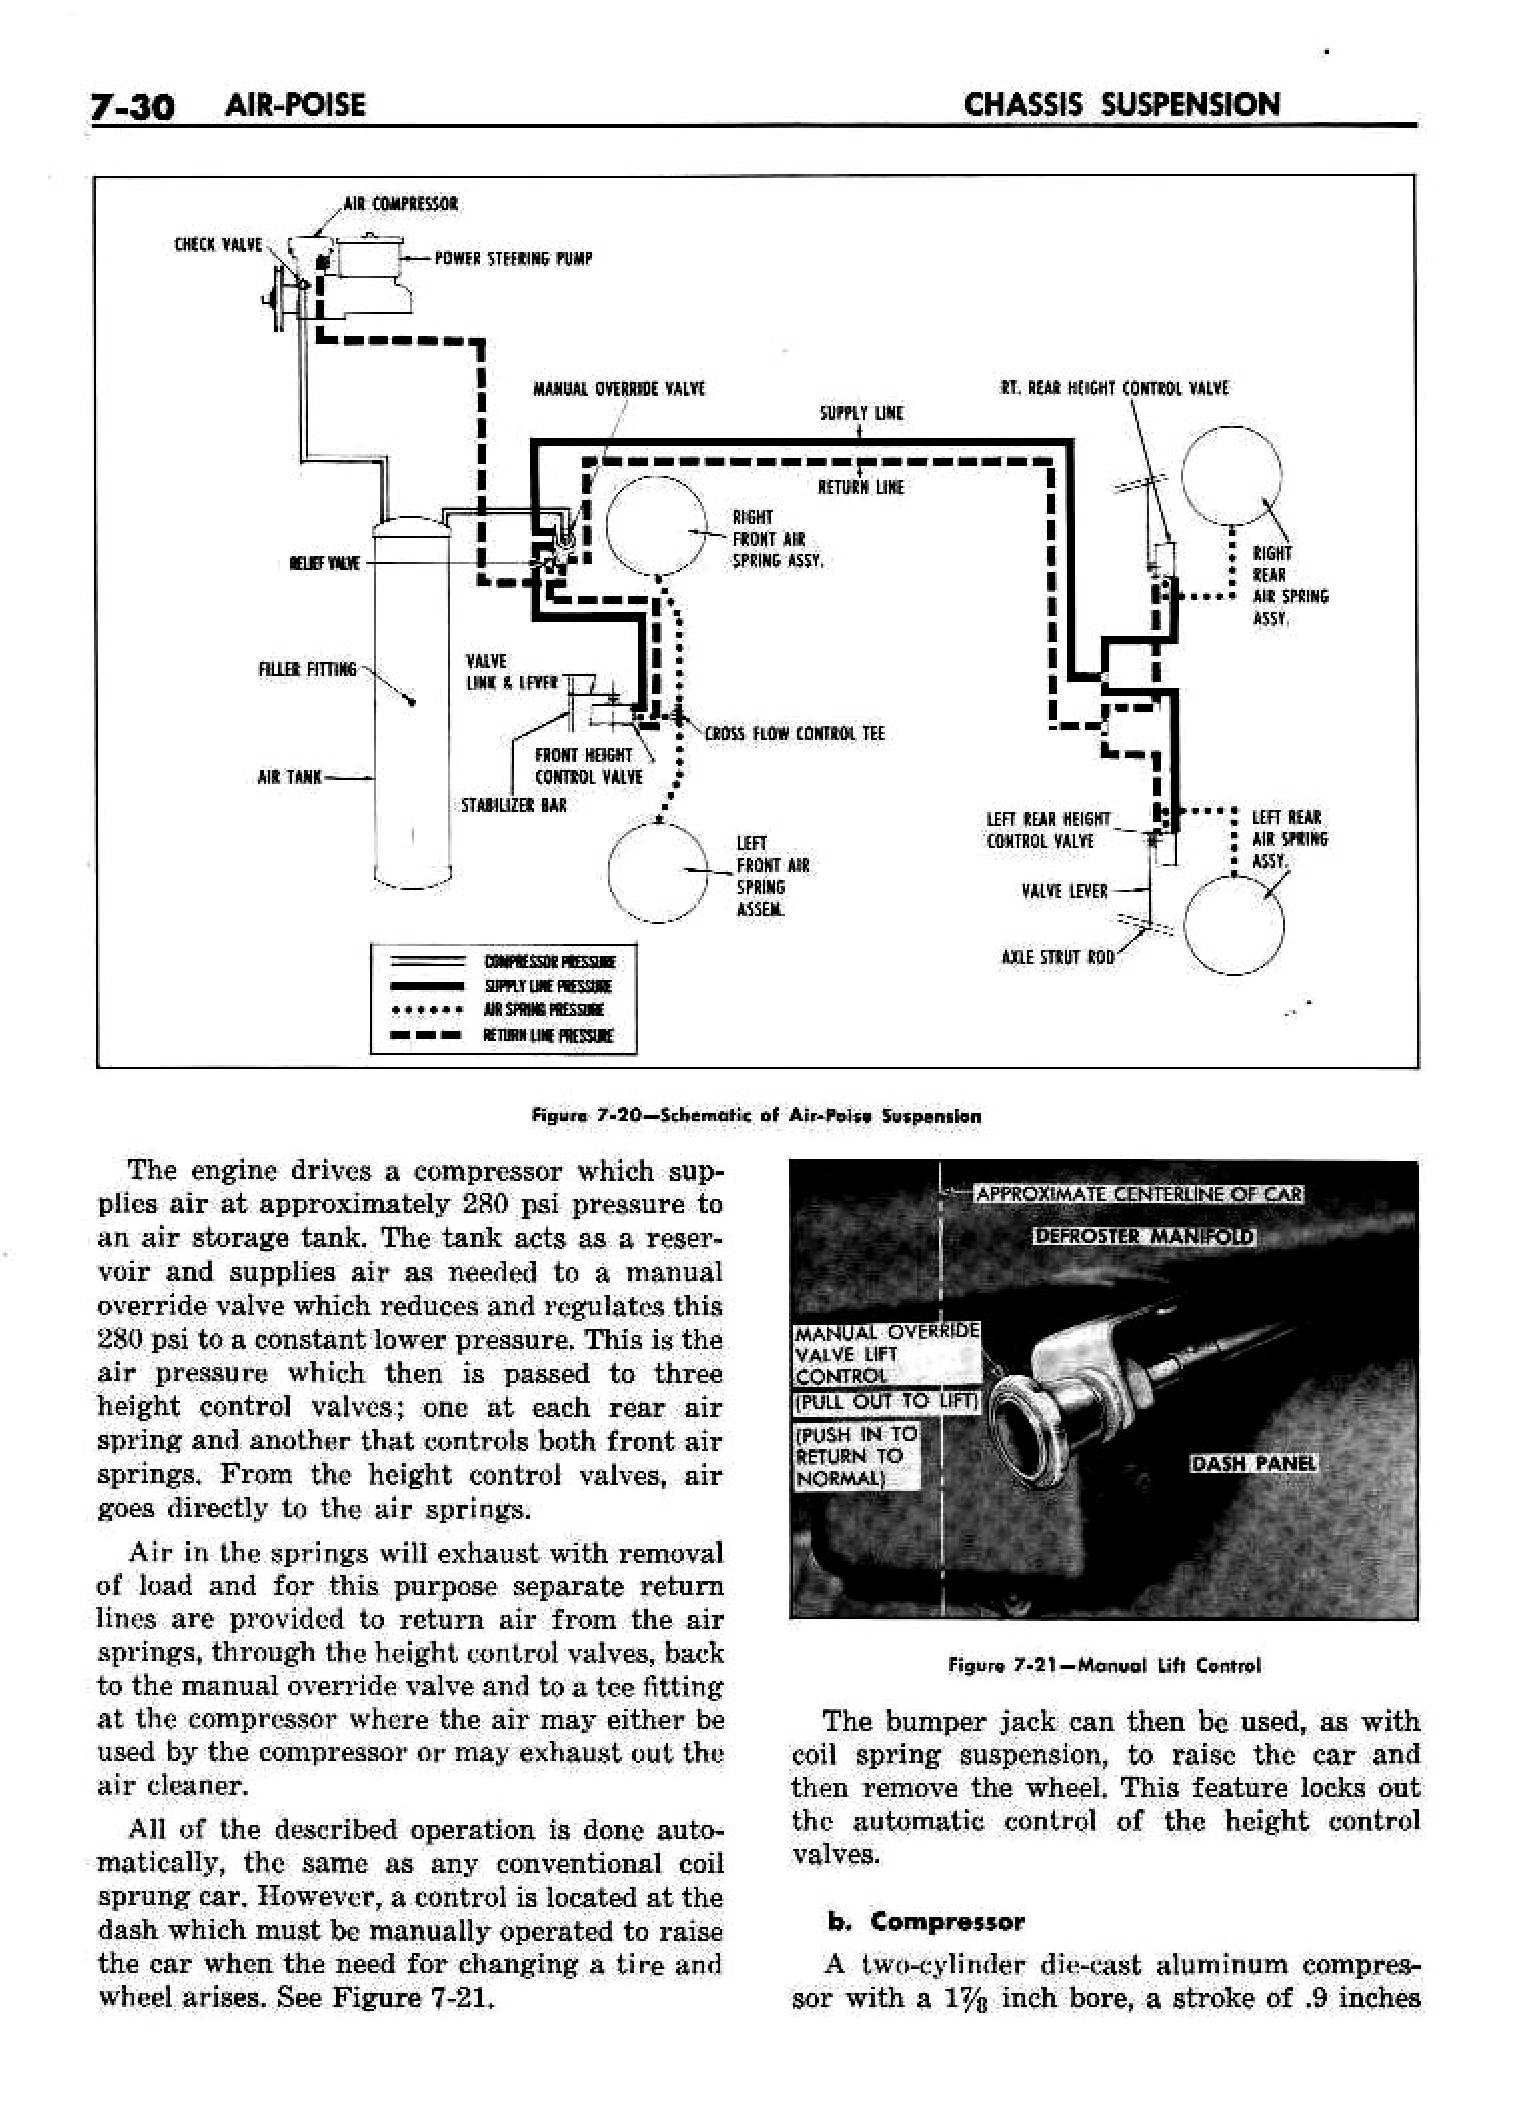 n_08 1958 Buick Shop Manual - Chassis Suspension_30.jpg